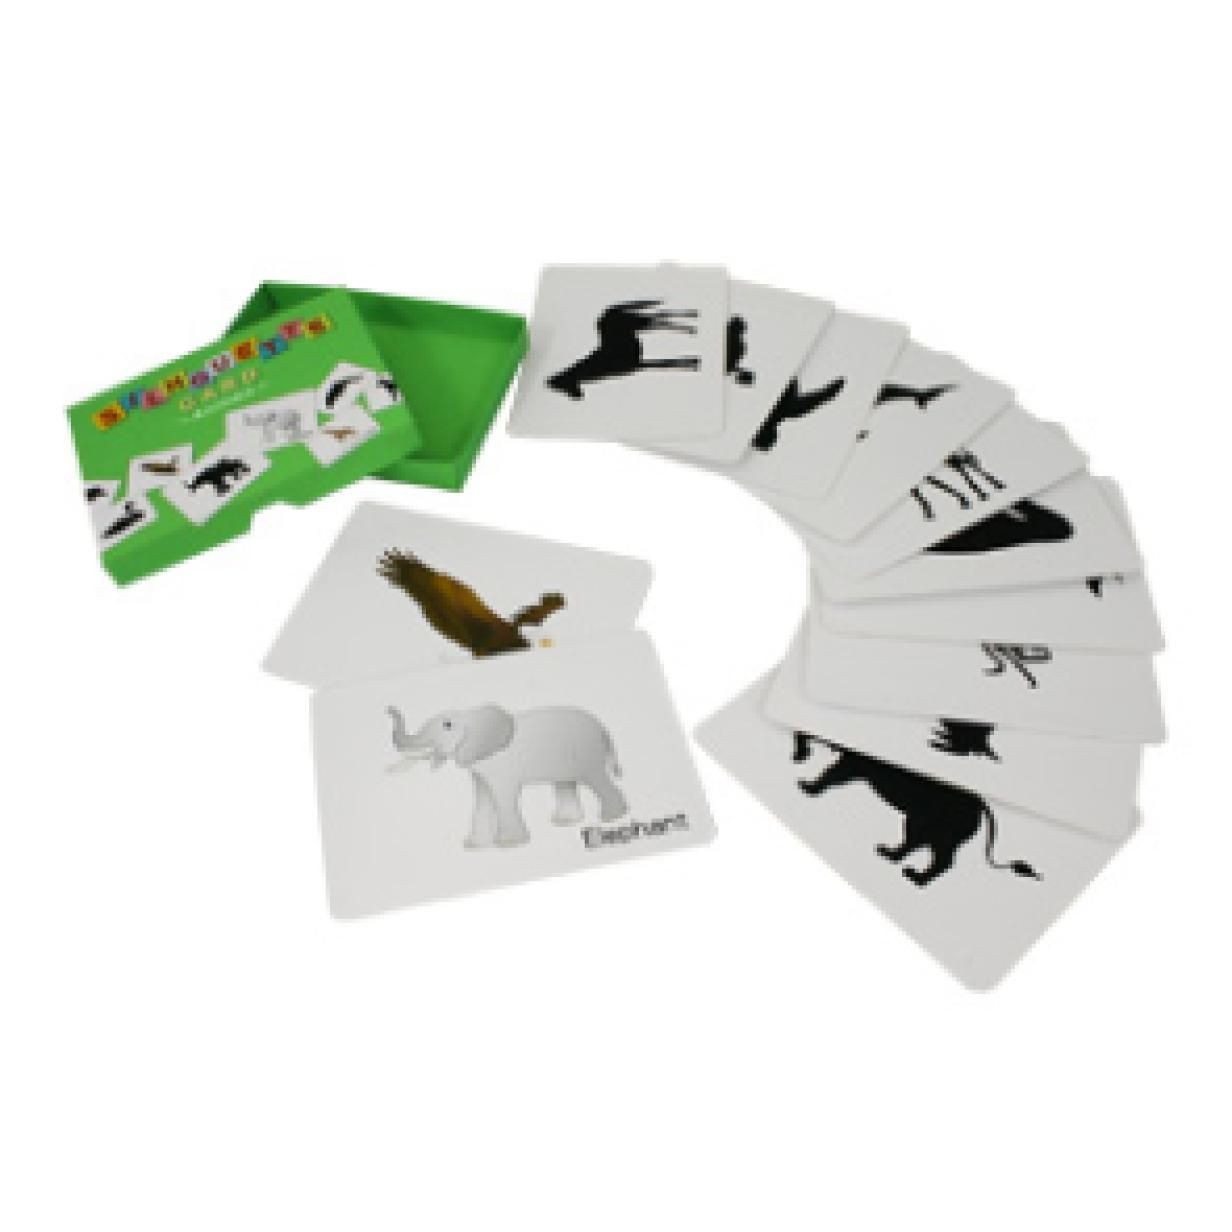 Canon Papercraft Animals Silhouette Card Animals toys Paper Craft Educational Game